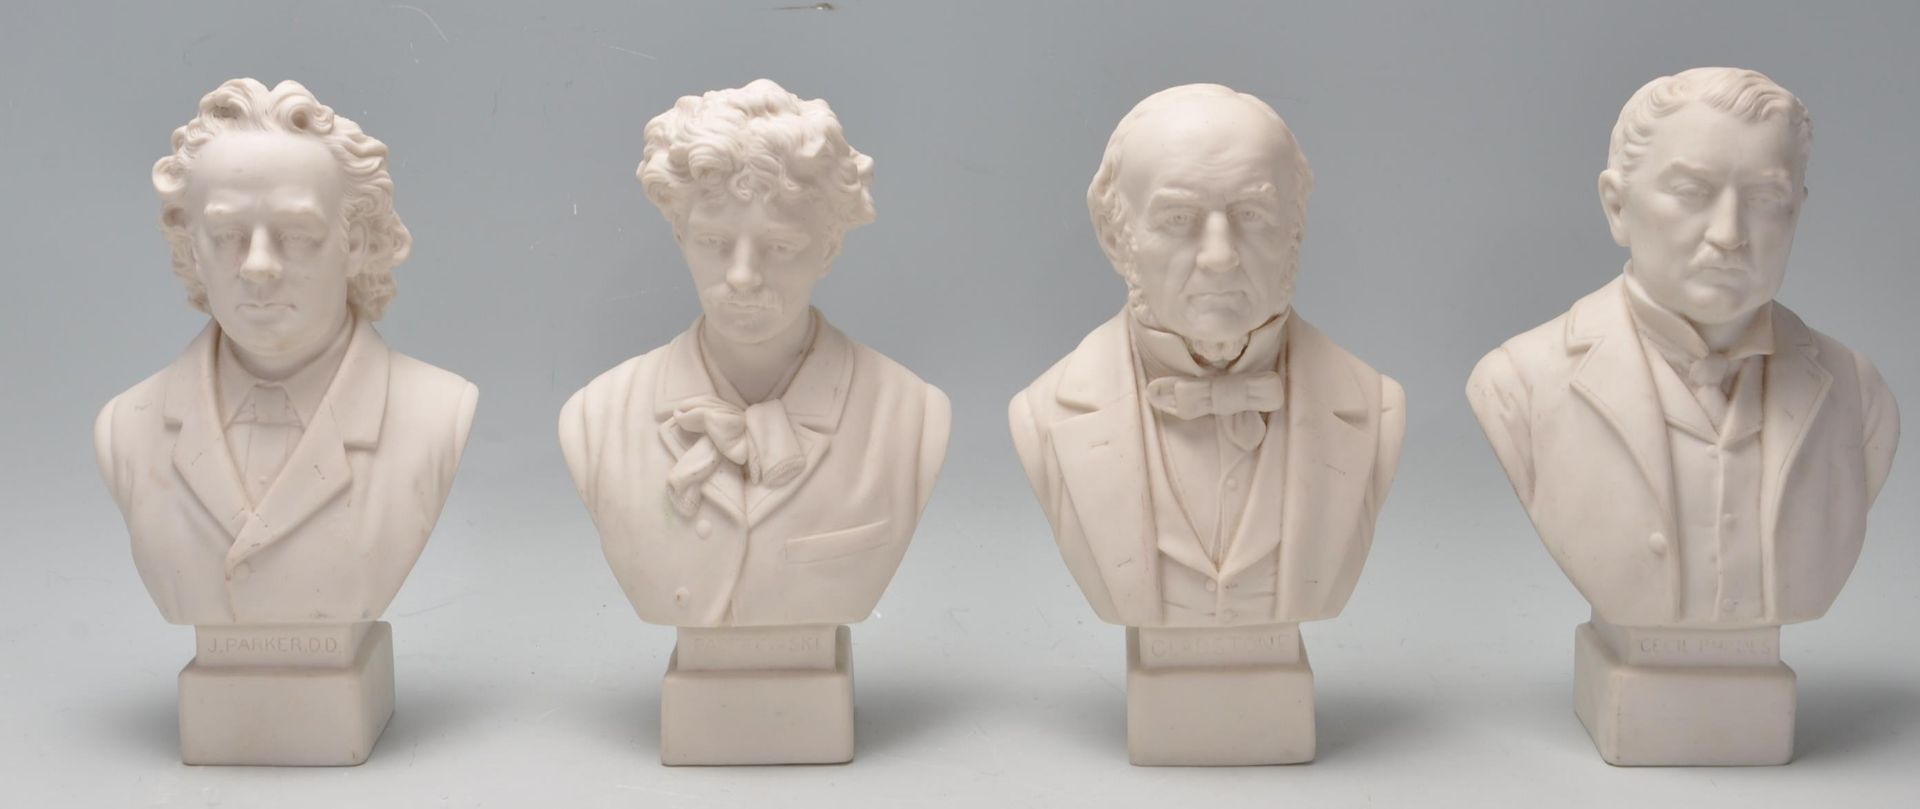 FOUR 20TH CENTURY BISQUE BUST FIGURINES - Image 5 of 5